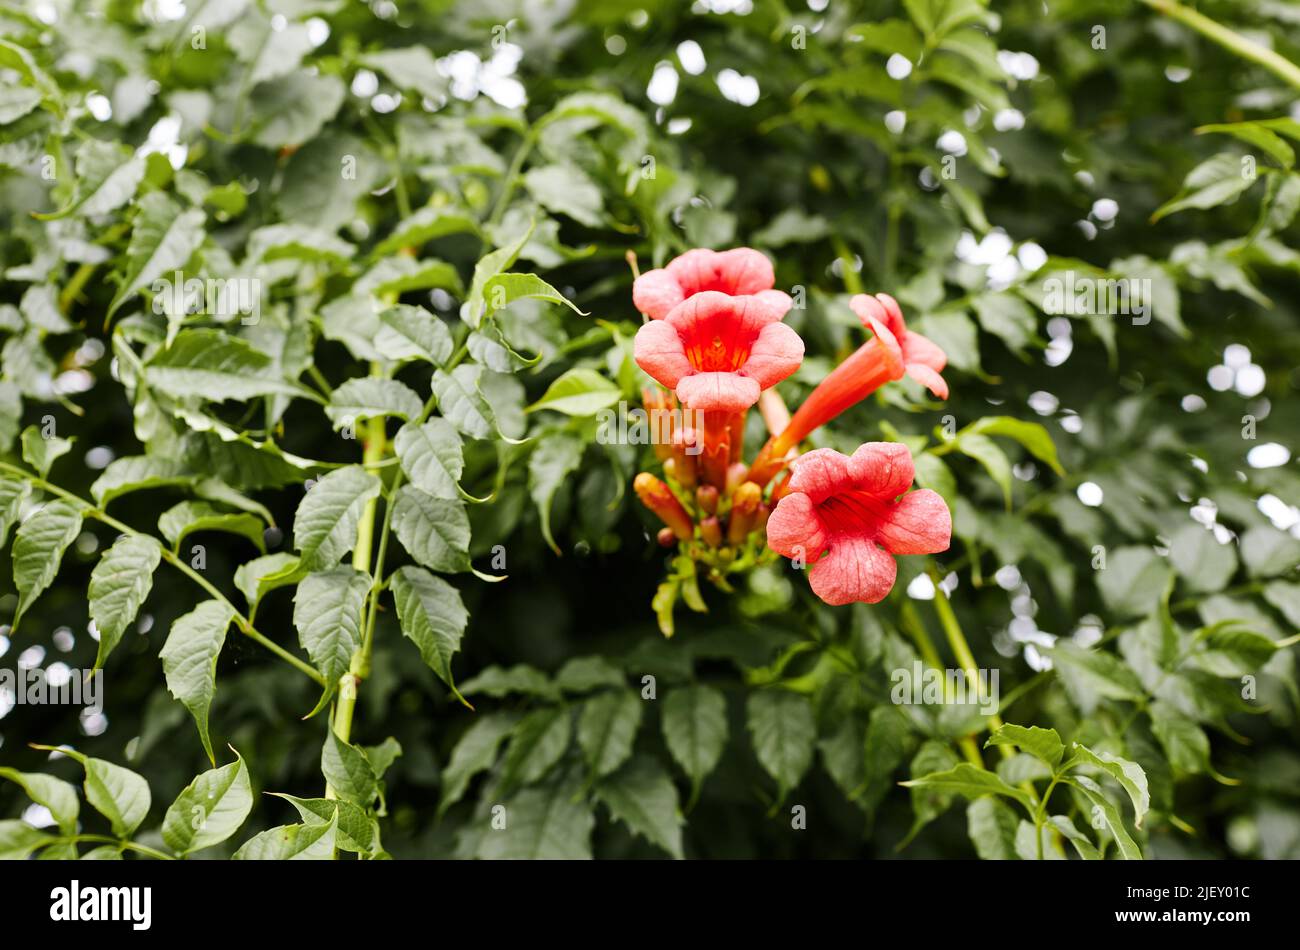 Beautiful red flowers of the trumpet vine or trumpet creeper Campsis radicans. Family name Bignoniaceae, Scientific name Campsis. Selective focus with Stock Photo